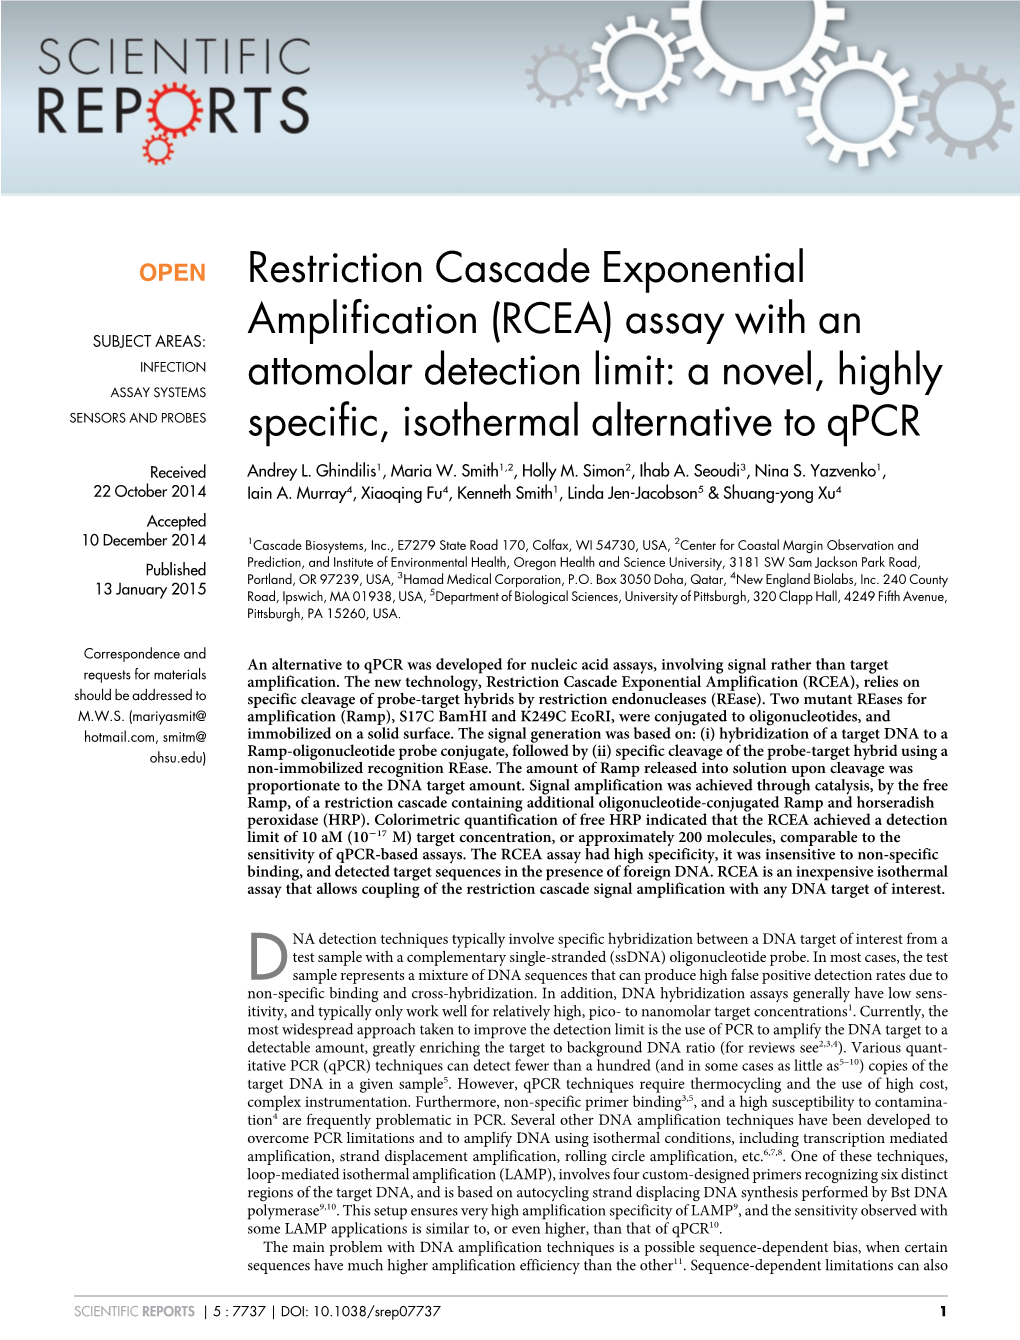 Restriction Cascade Exponential Amplification (RCEA), Relies on Should Be Addressed to Specific Cleavage of Probe-Target Hybrids by Restriction Endonucleases (Rease)